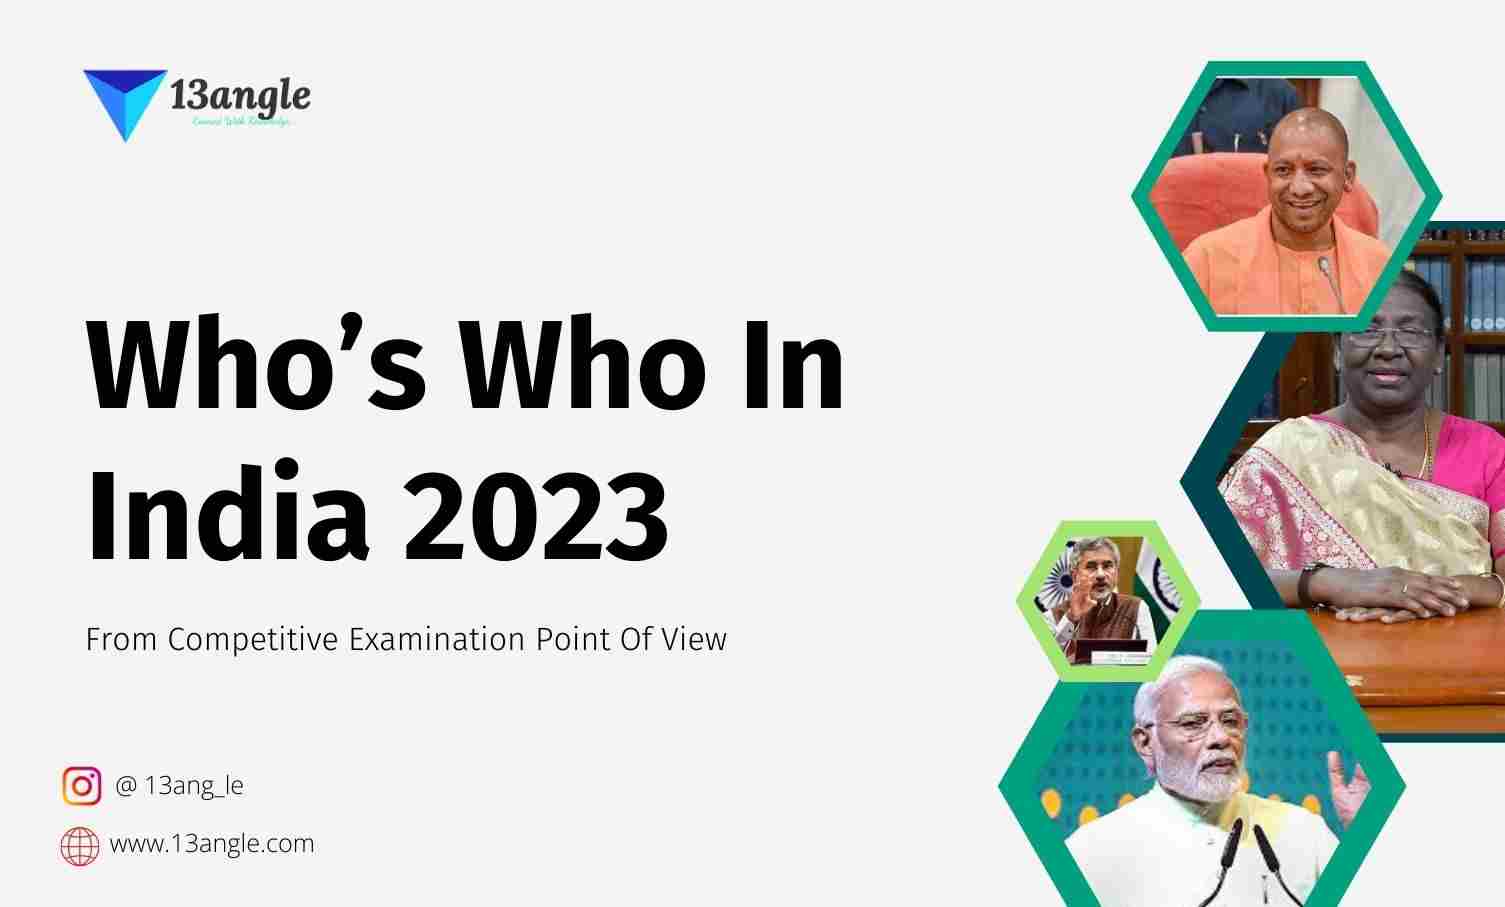 Who’s Who In India 2023- 13angle.com